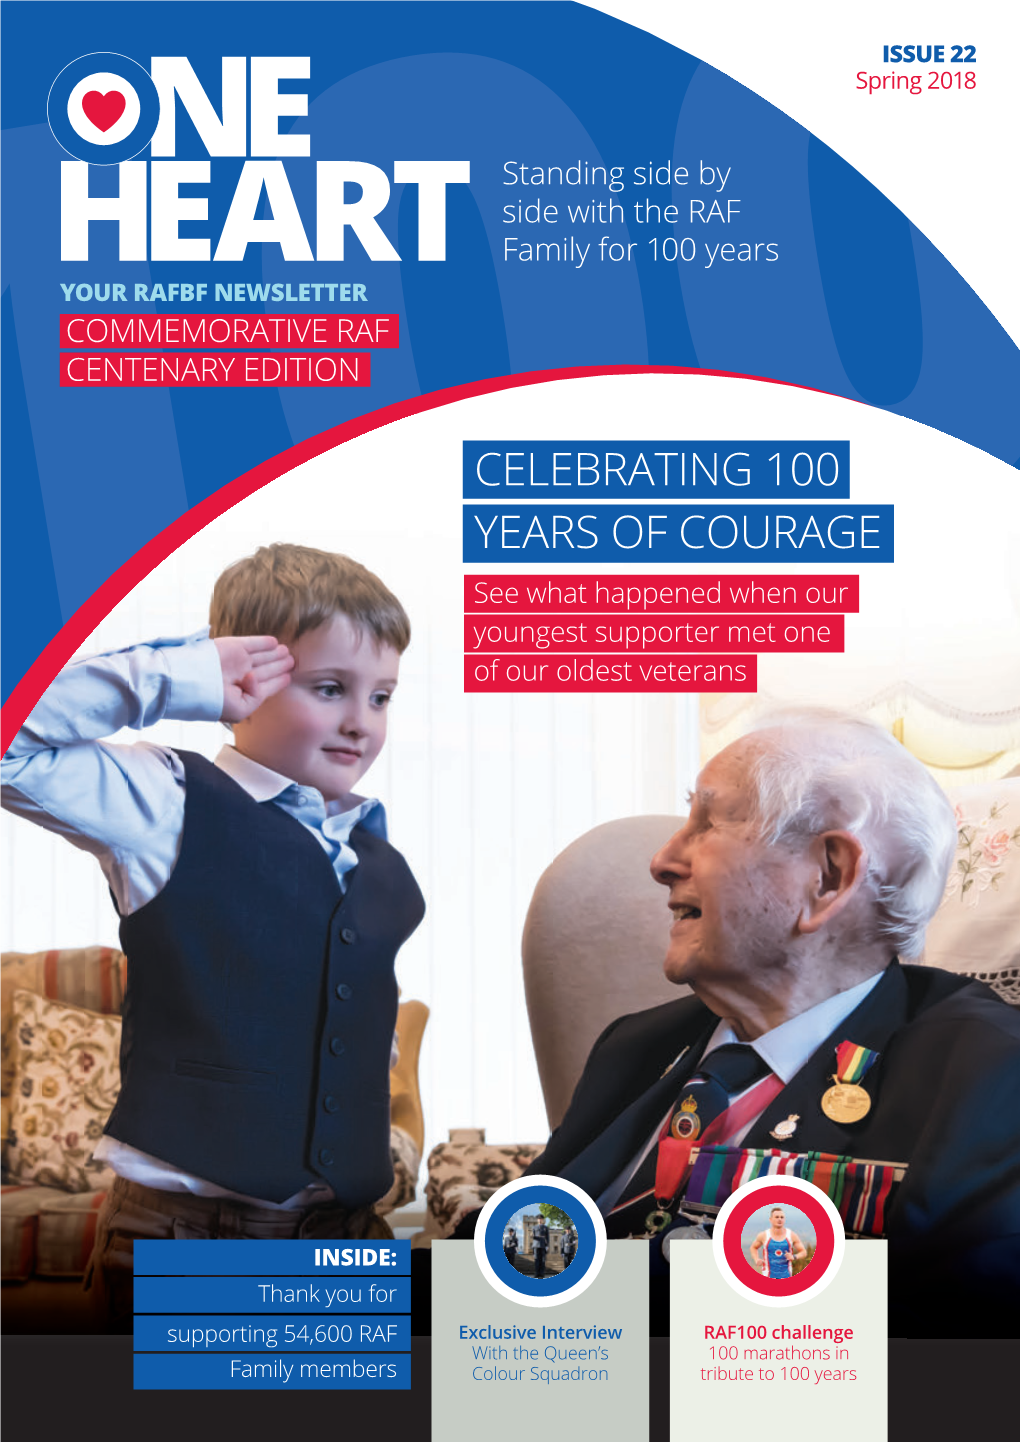 CELEBRATING 100 YEARS of COURAGE See What Happened When Our Youngest Supporter Met One of Our Oldest Veterans